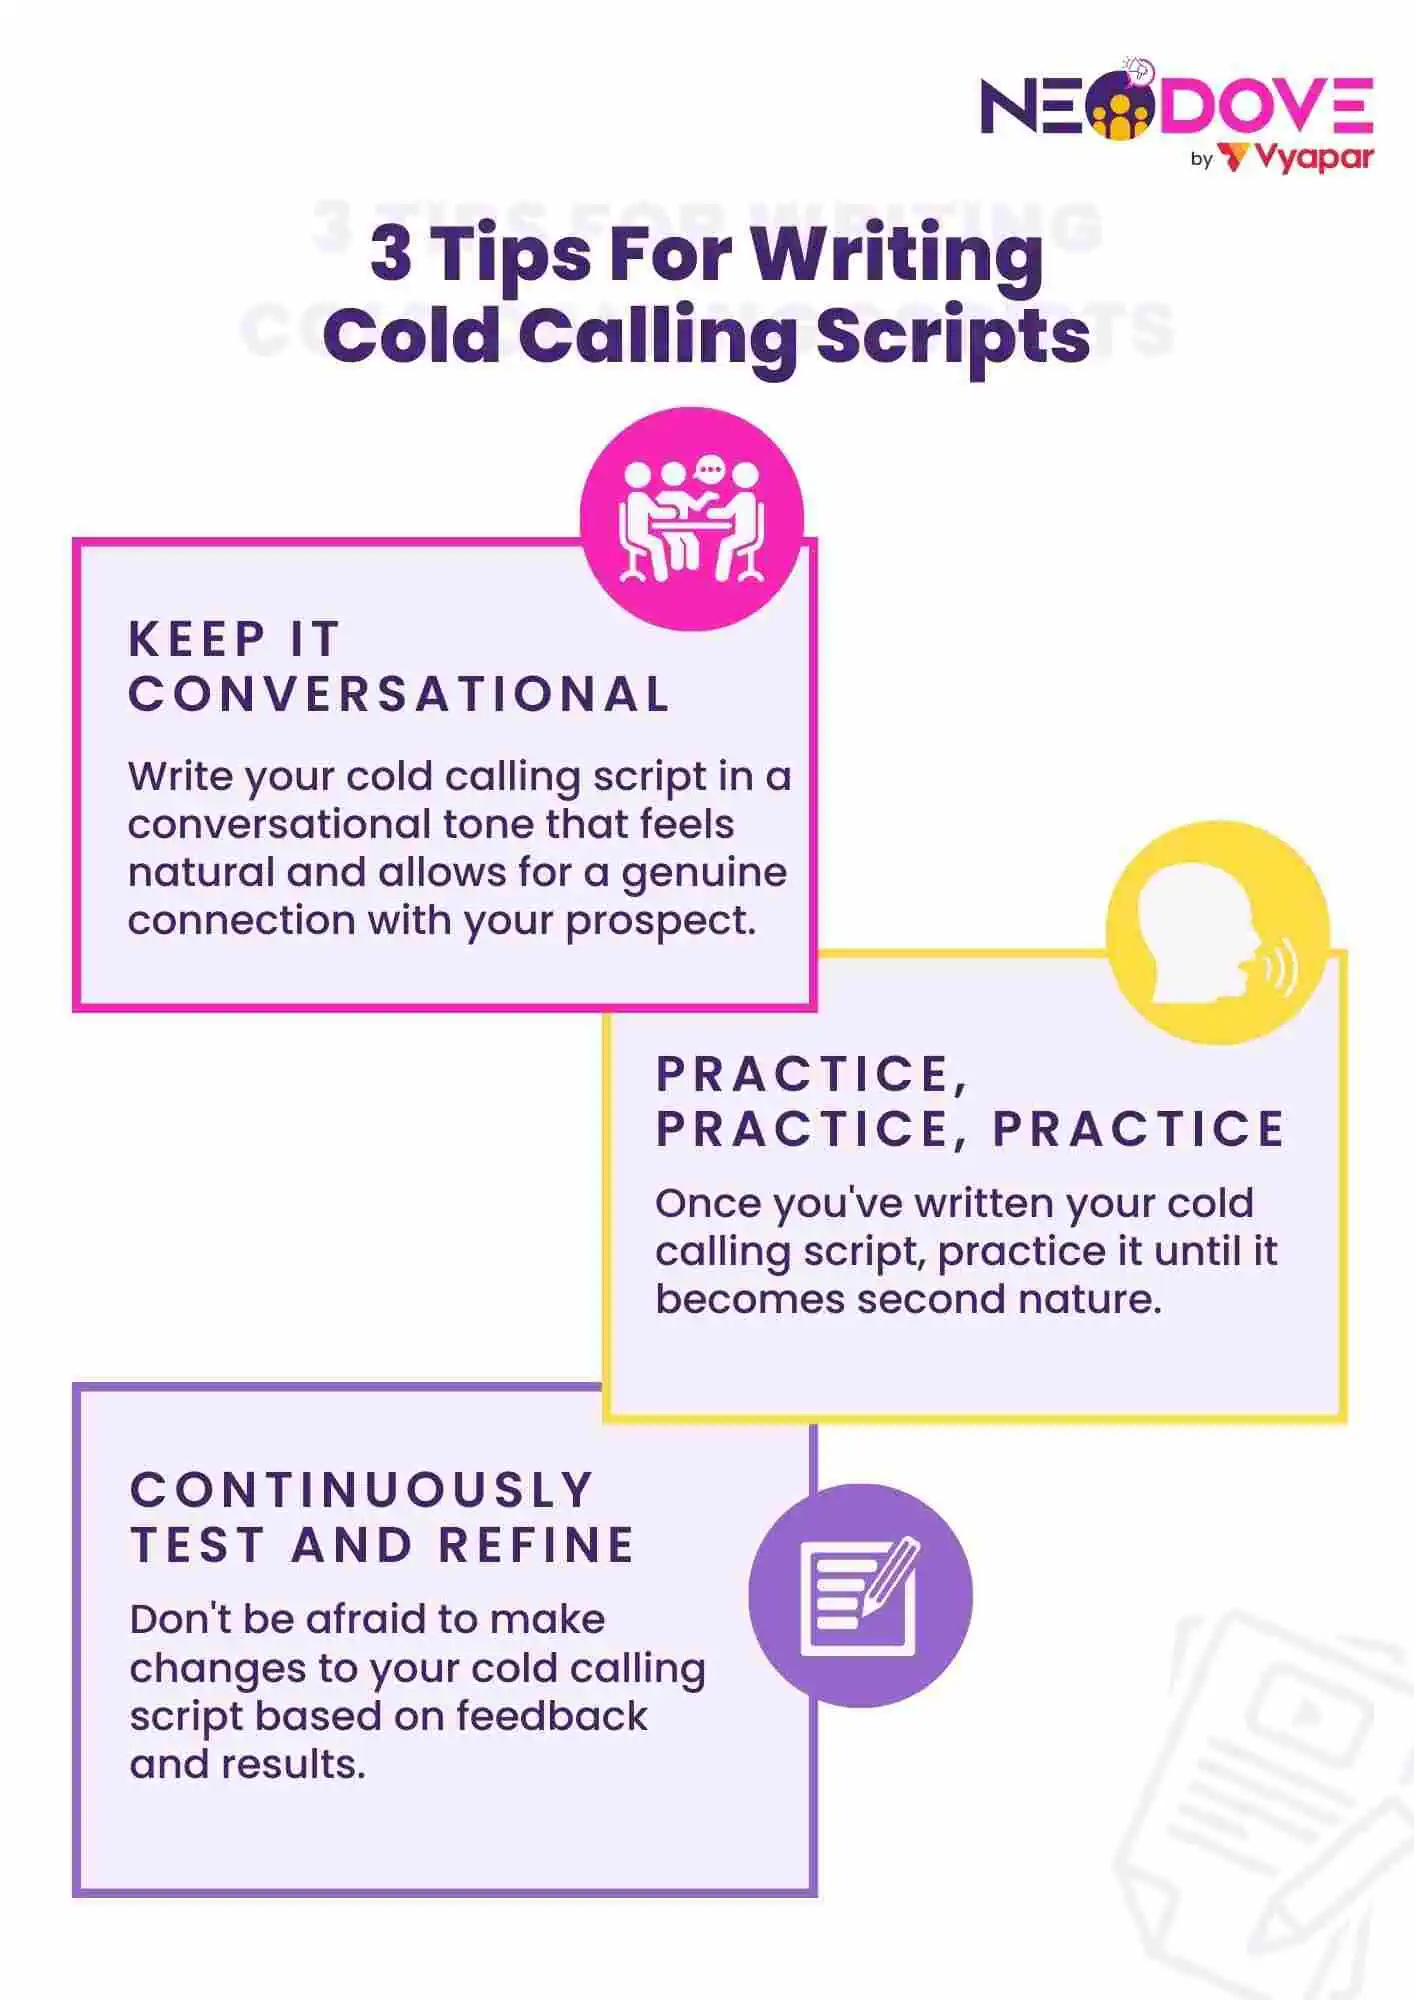 3 Tips For Writing Cold Calling Scripts - NeoDove